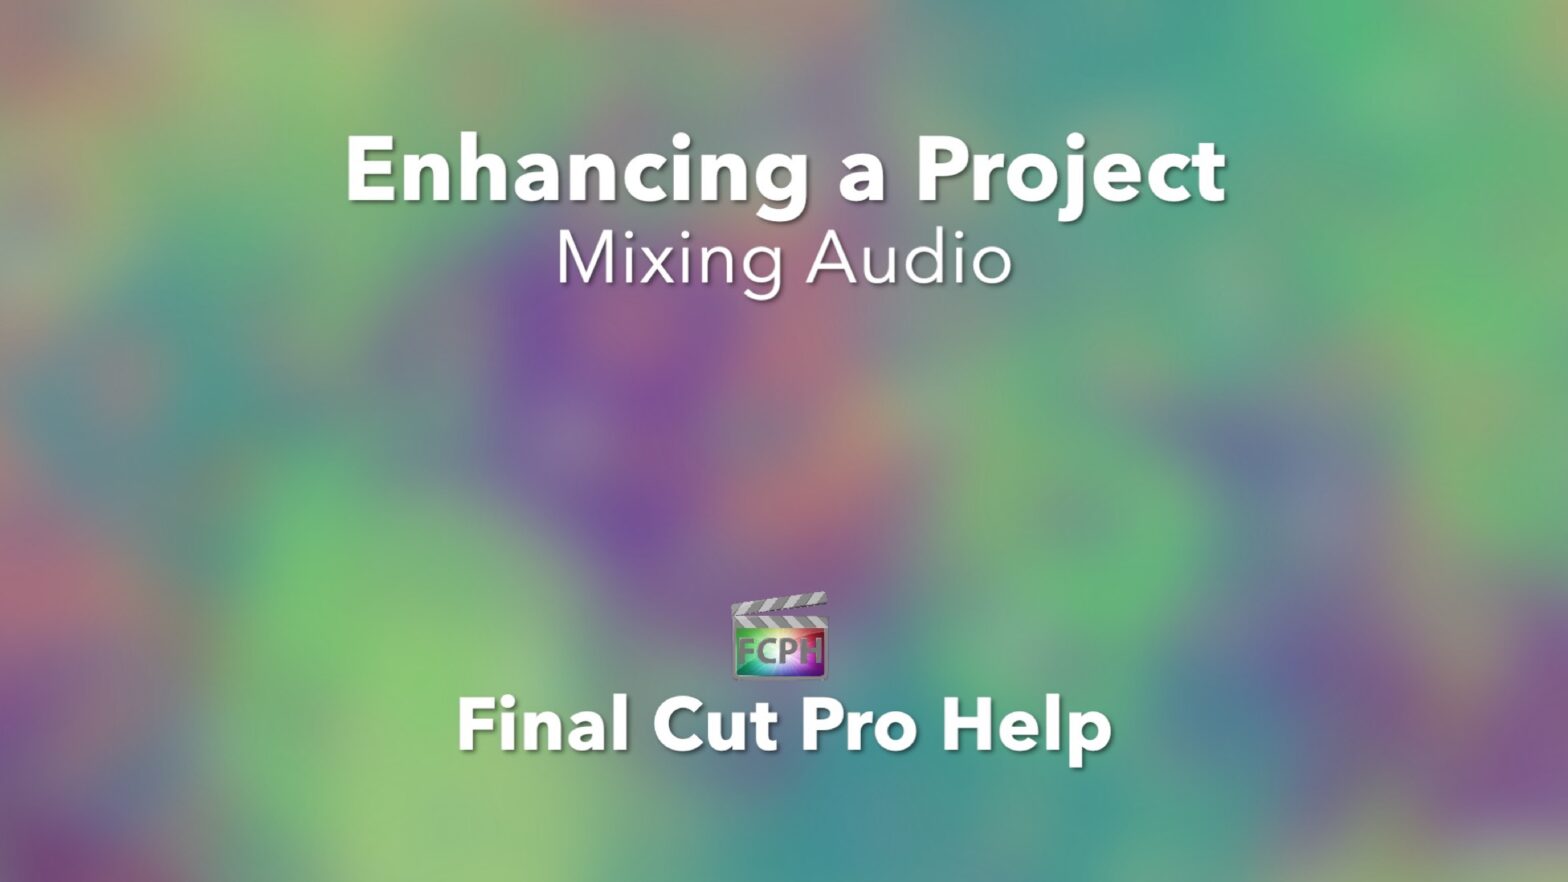 Enhancing a Project Mixing Audio